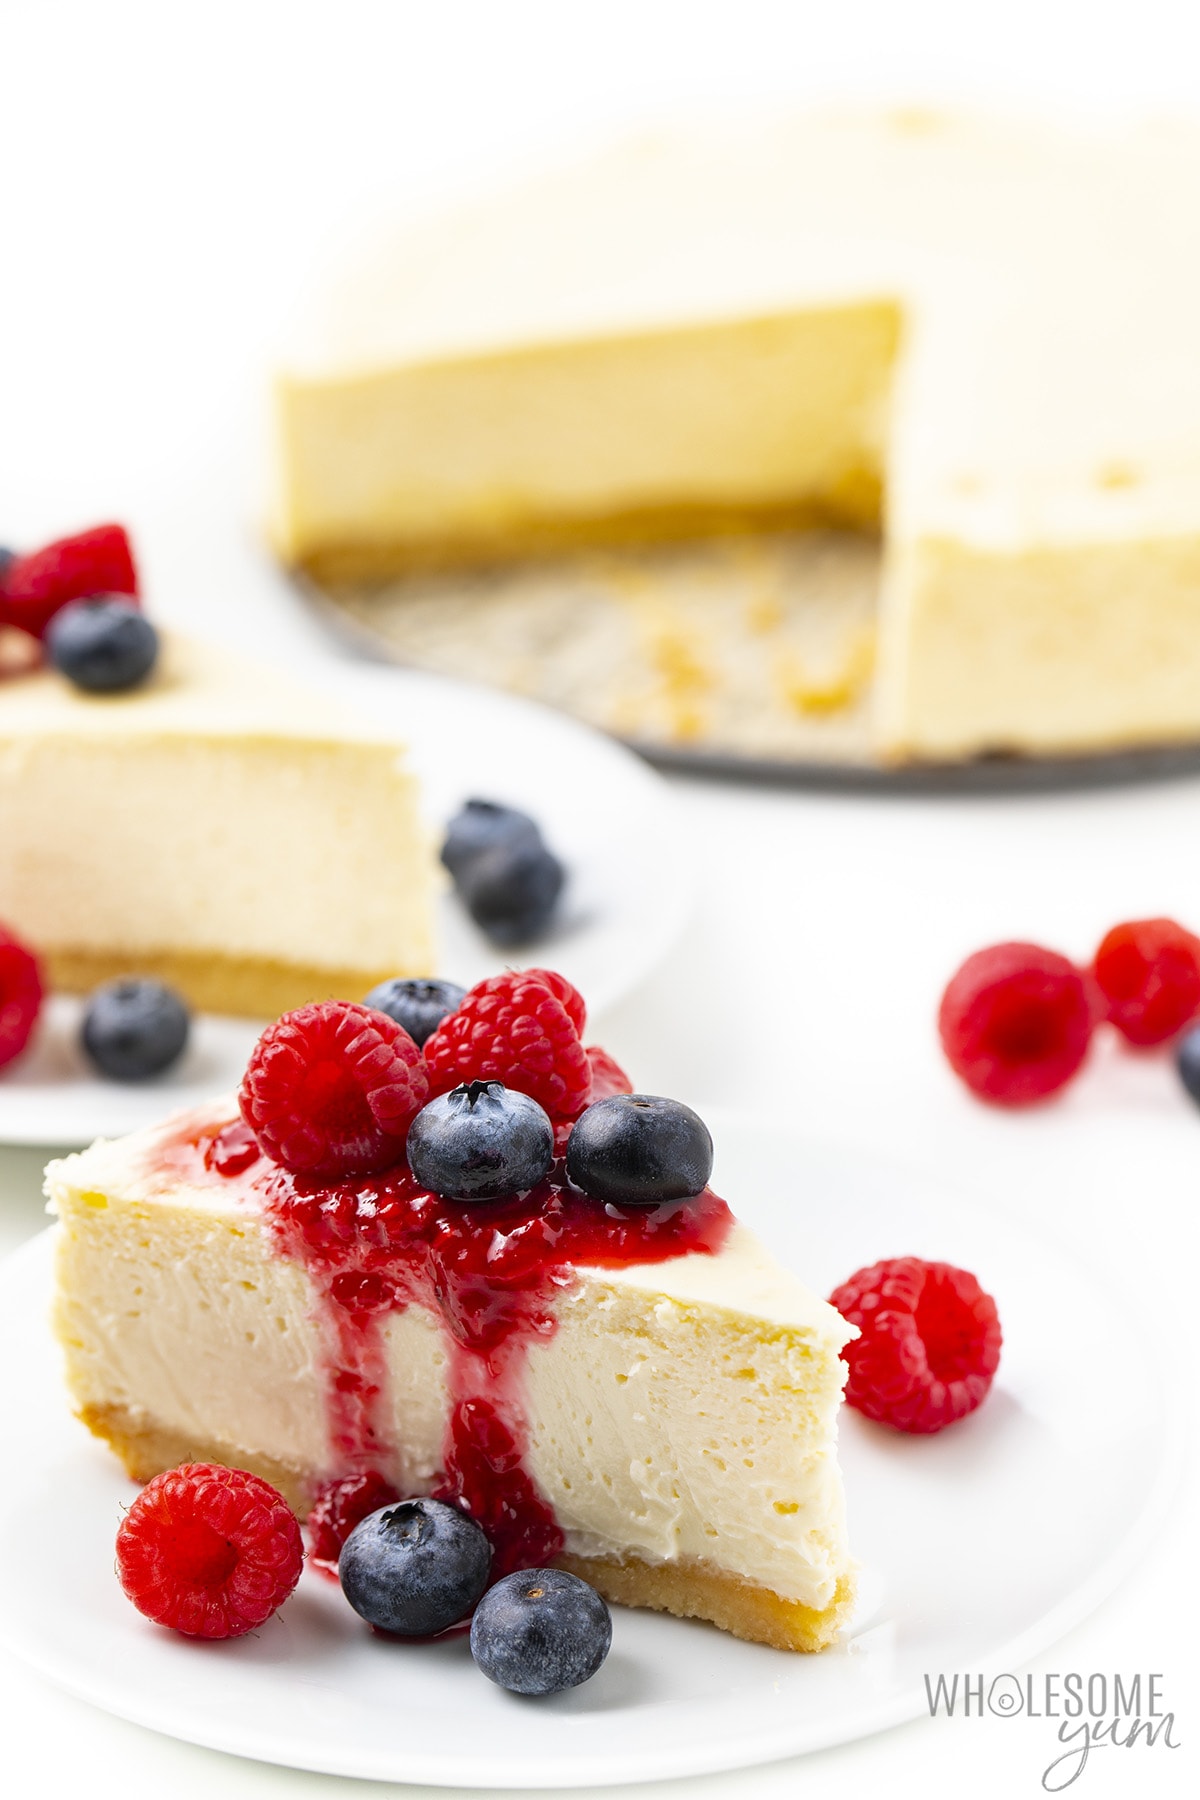 Slice of sugar-free cheesecake with whole cake in the background.